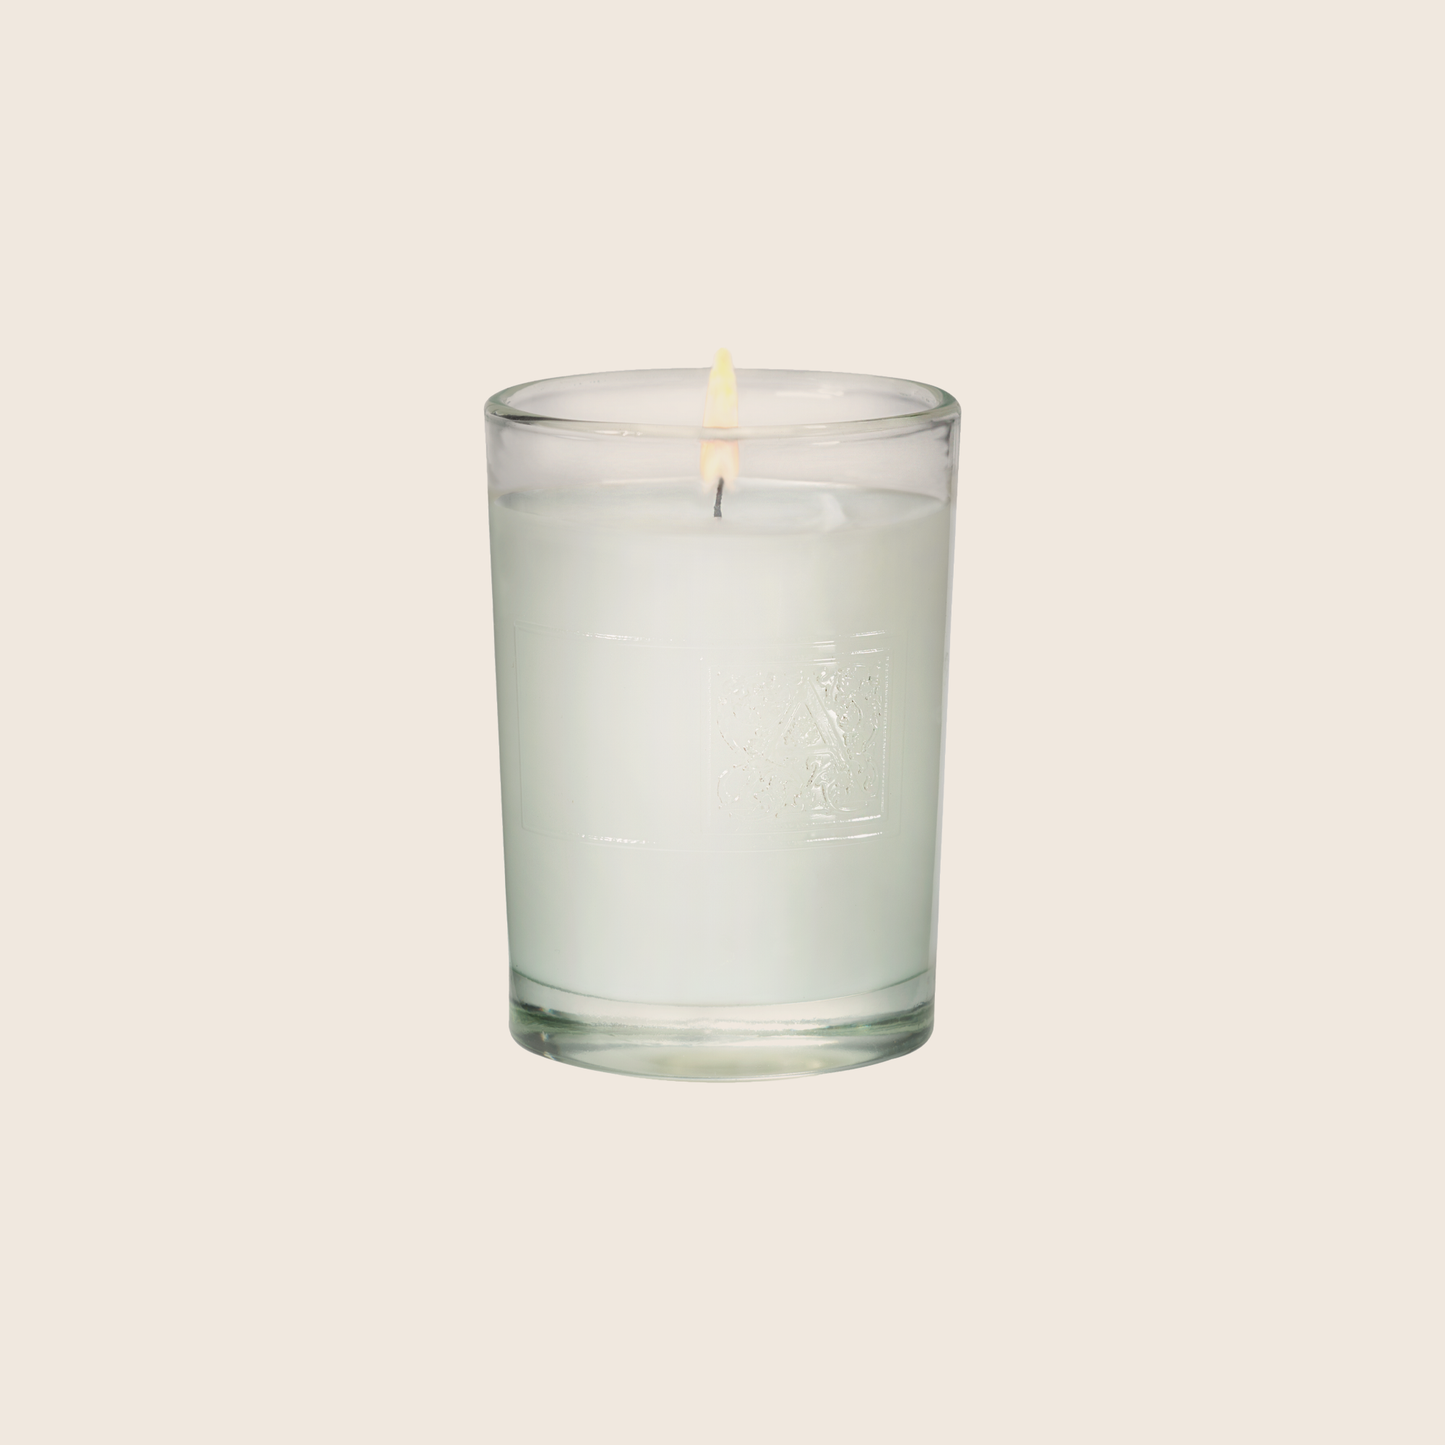 Load image into Gallery viewer, The Smell of Gardenia - Votive Glass Candle
